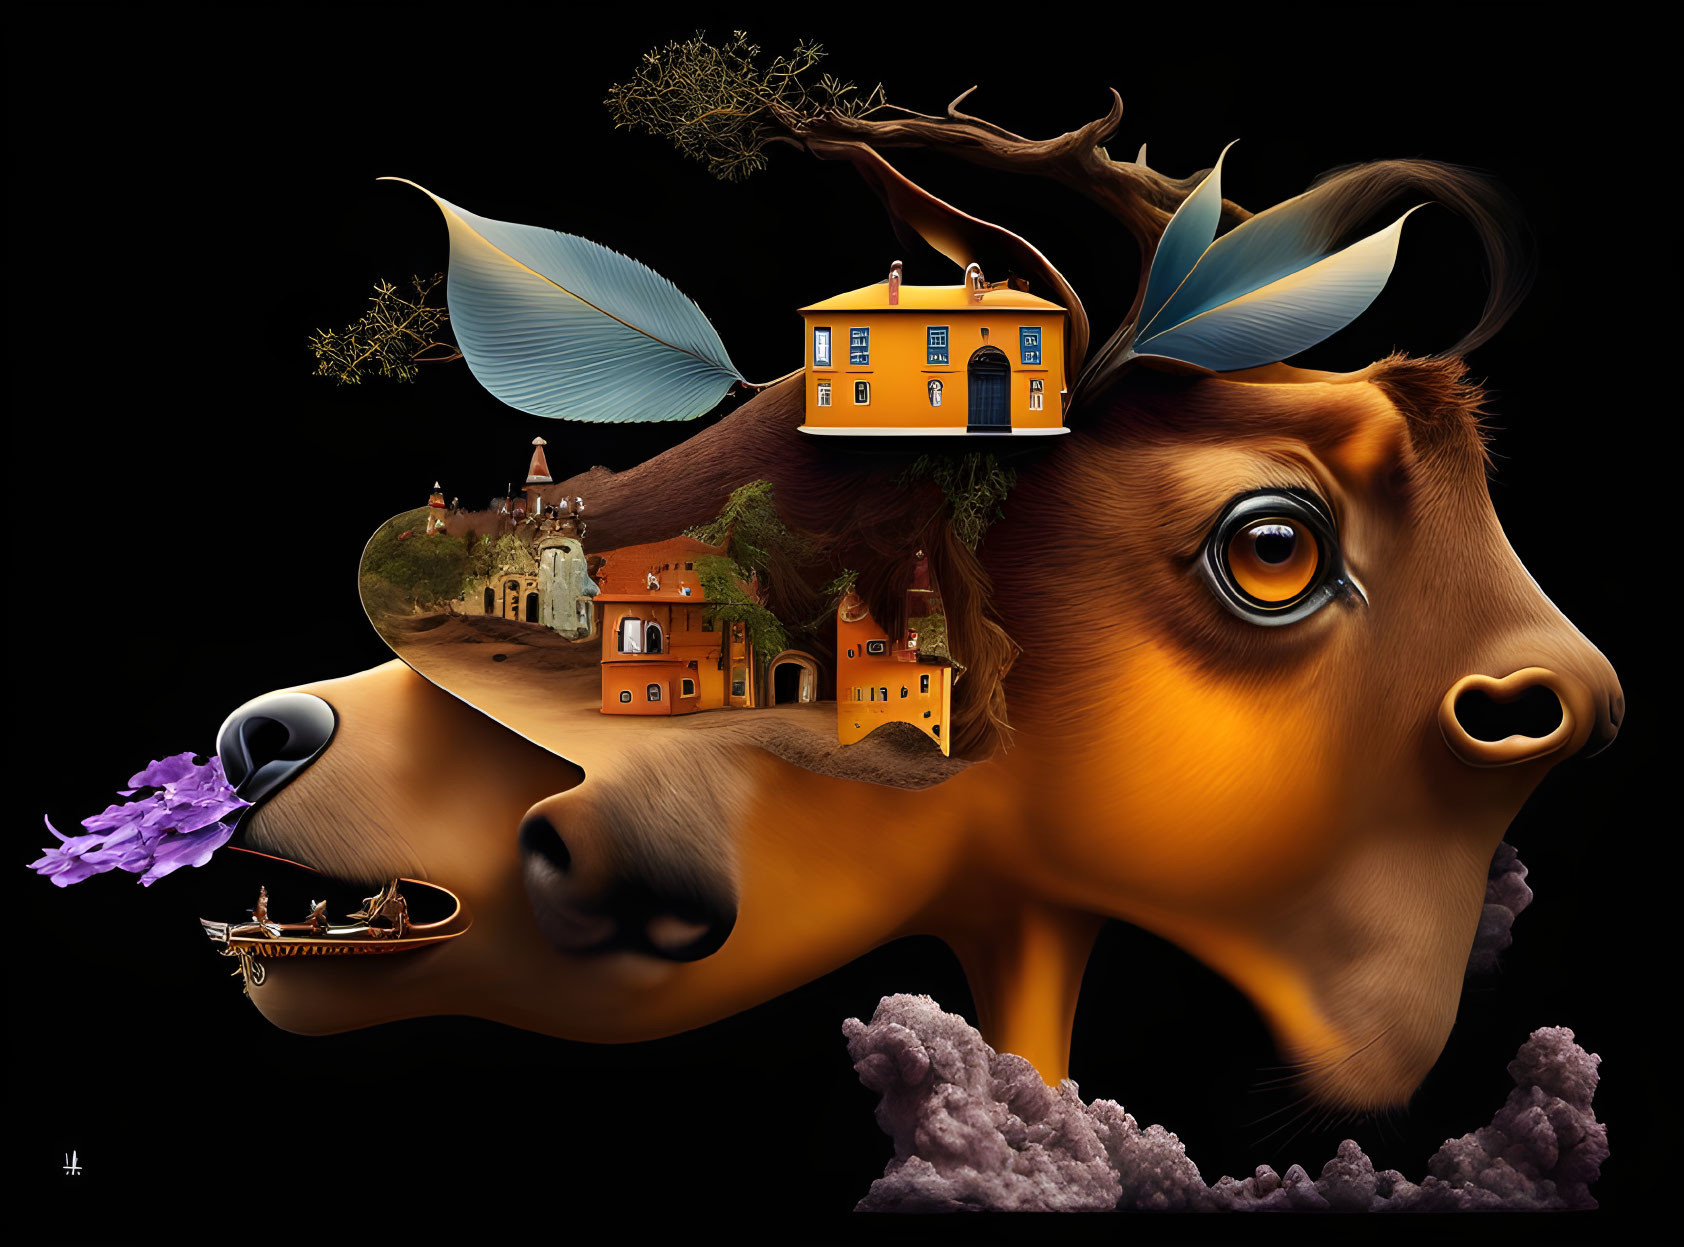 Surrealist artwork: cow with landscape elements on head, house, trees, feathers, boat on